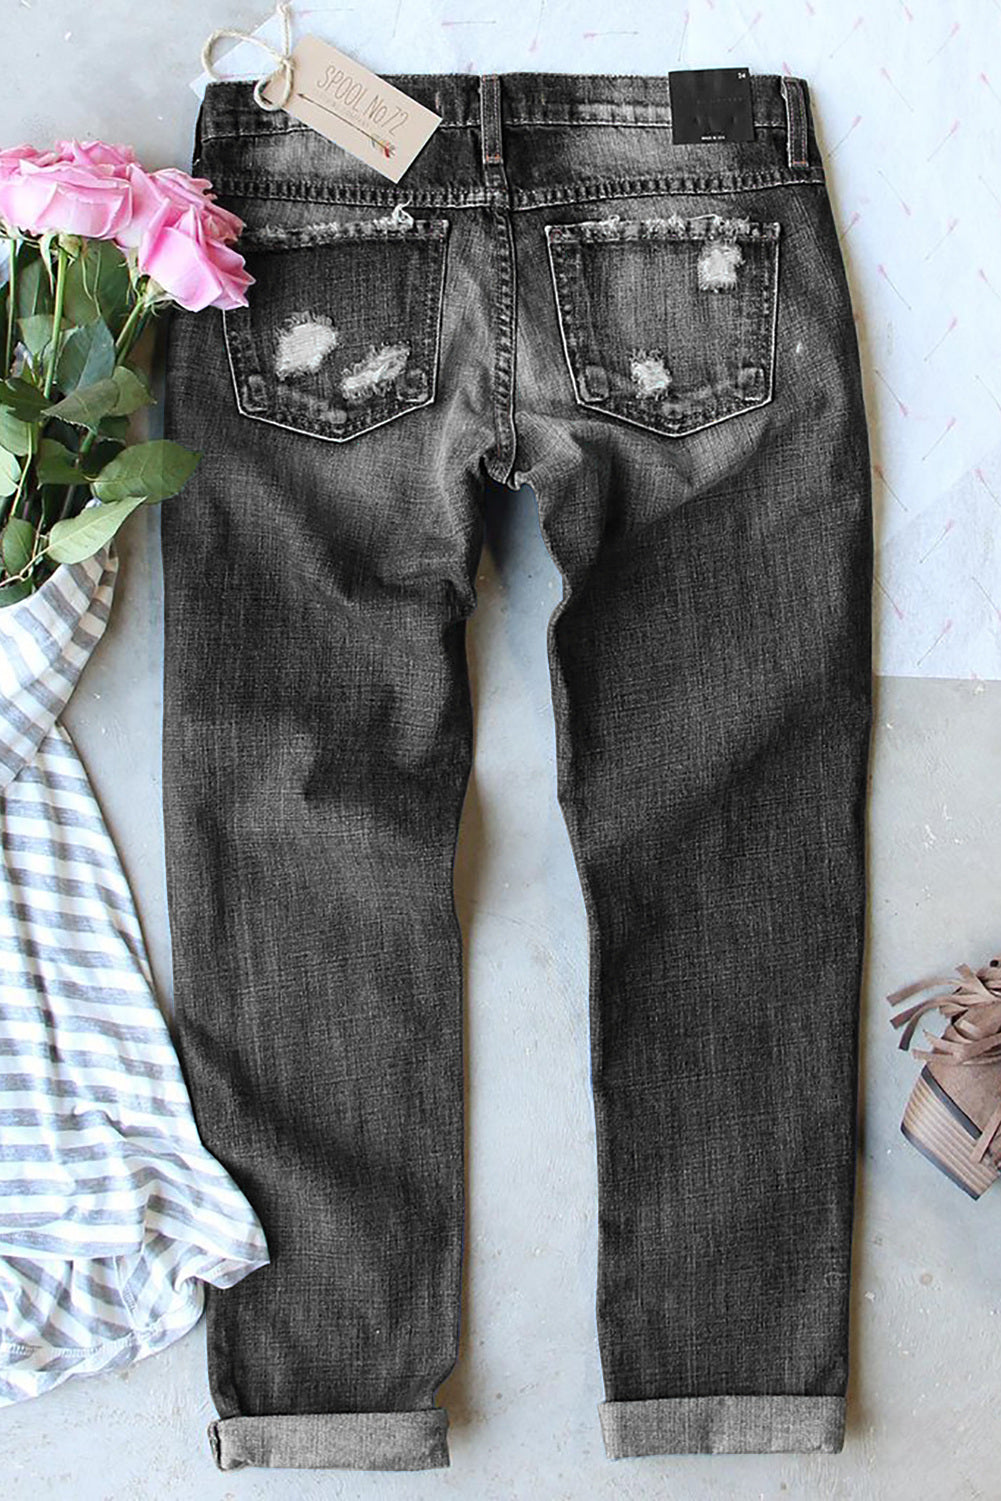 Gray Women's Ripped Boyfriend Jeans Buttoned Pockets Distressed Jeans LC782725-11